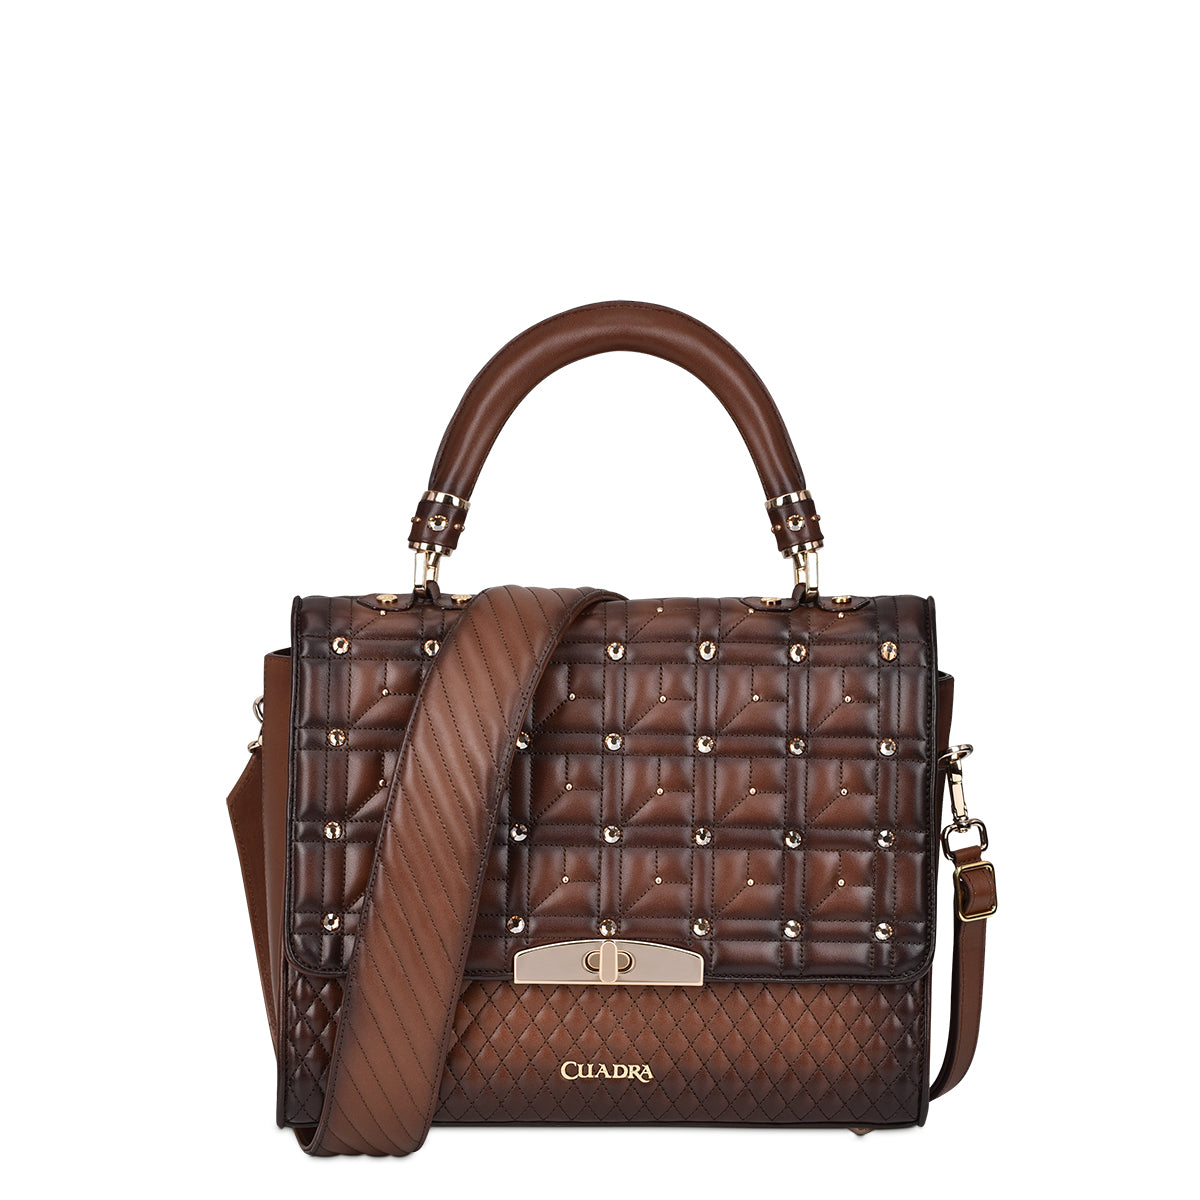 Honey leather embroidered handbag, Lady's handbag in bovine leather. Features quilted embroidery with metallic appliqués and authentic Austrian crystals.